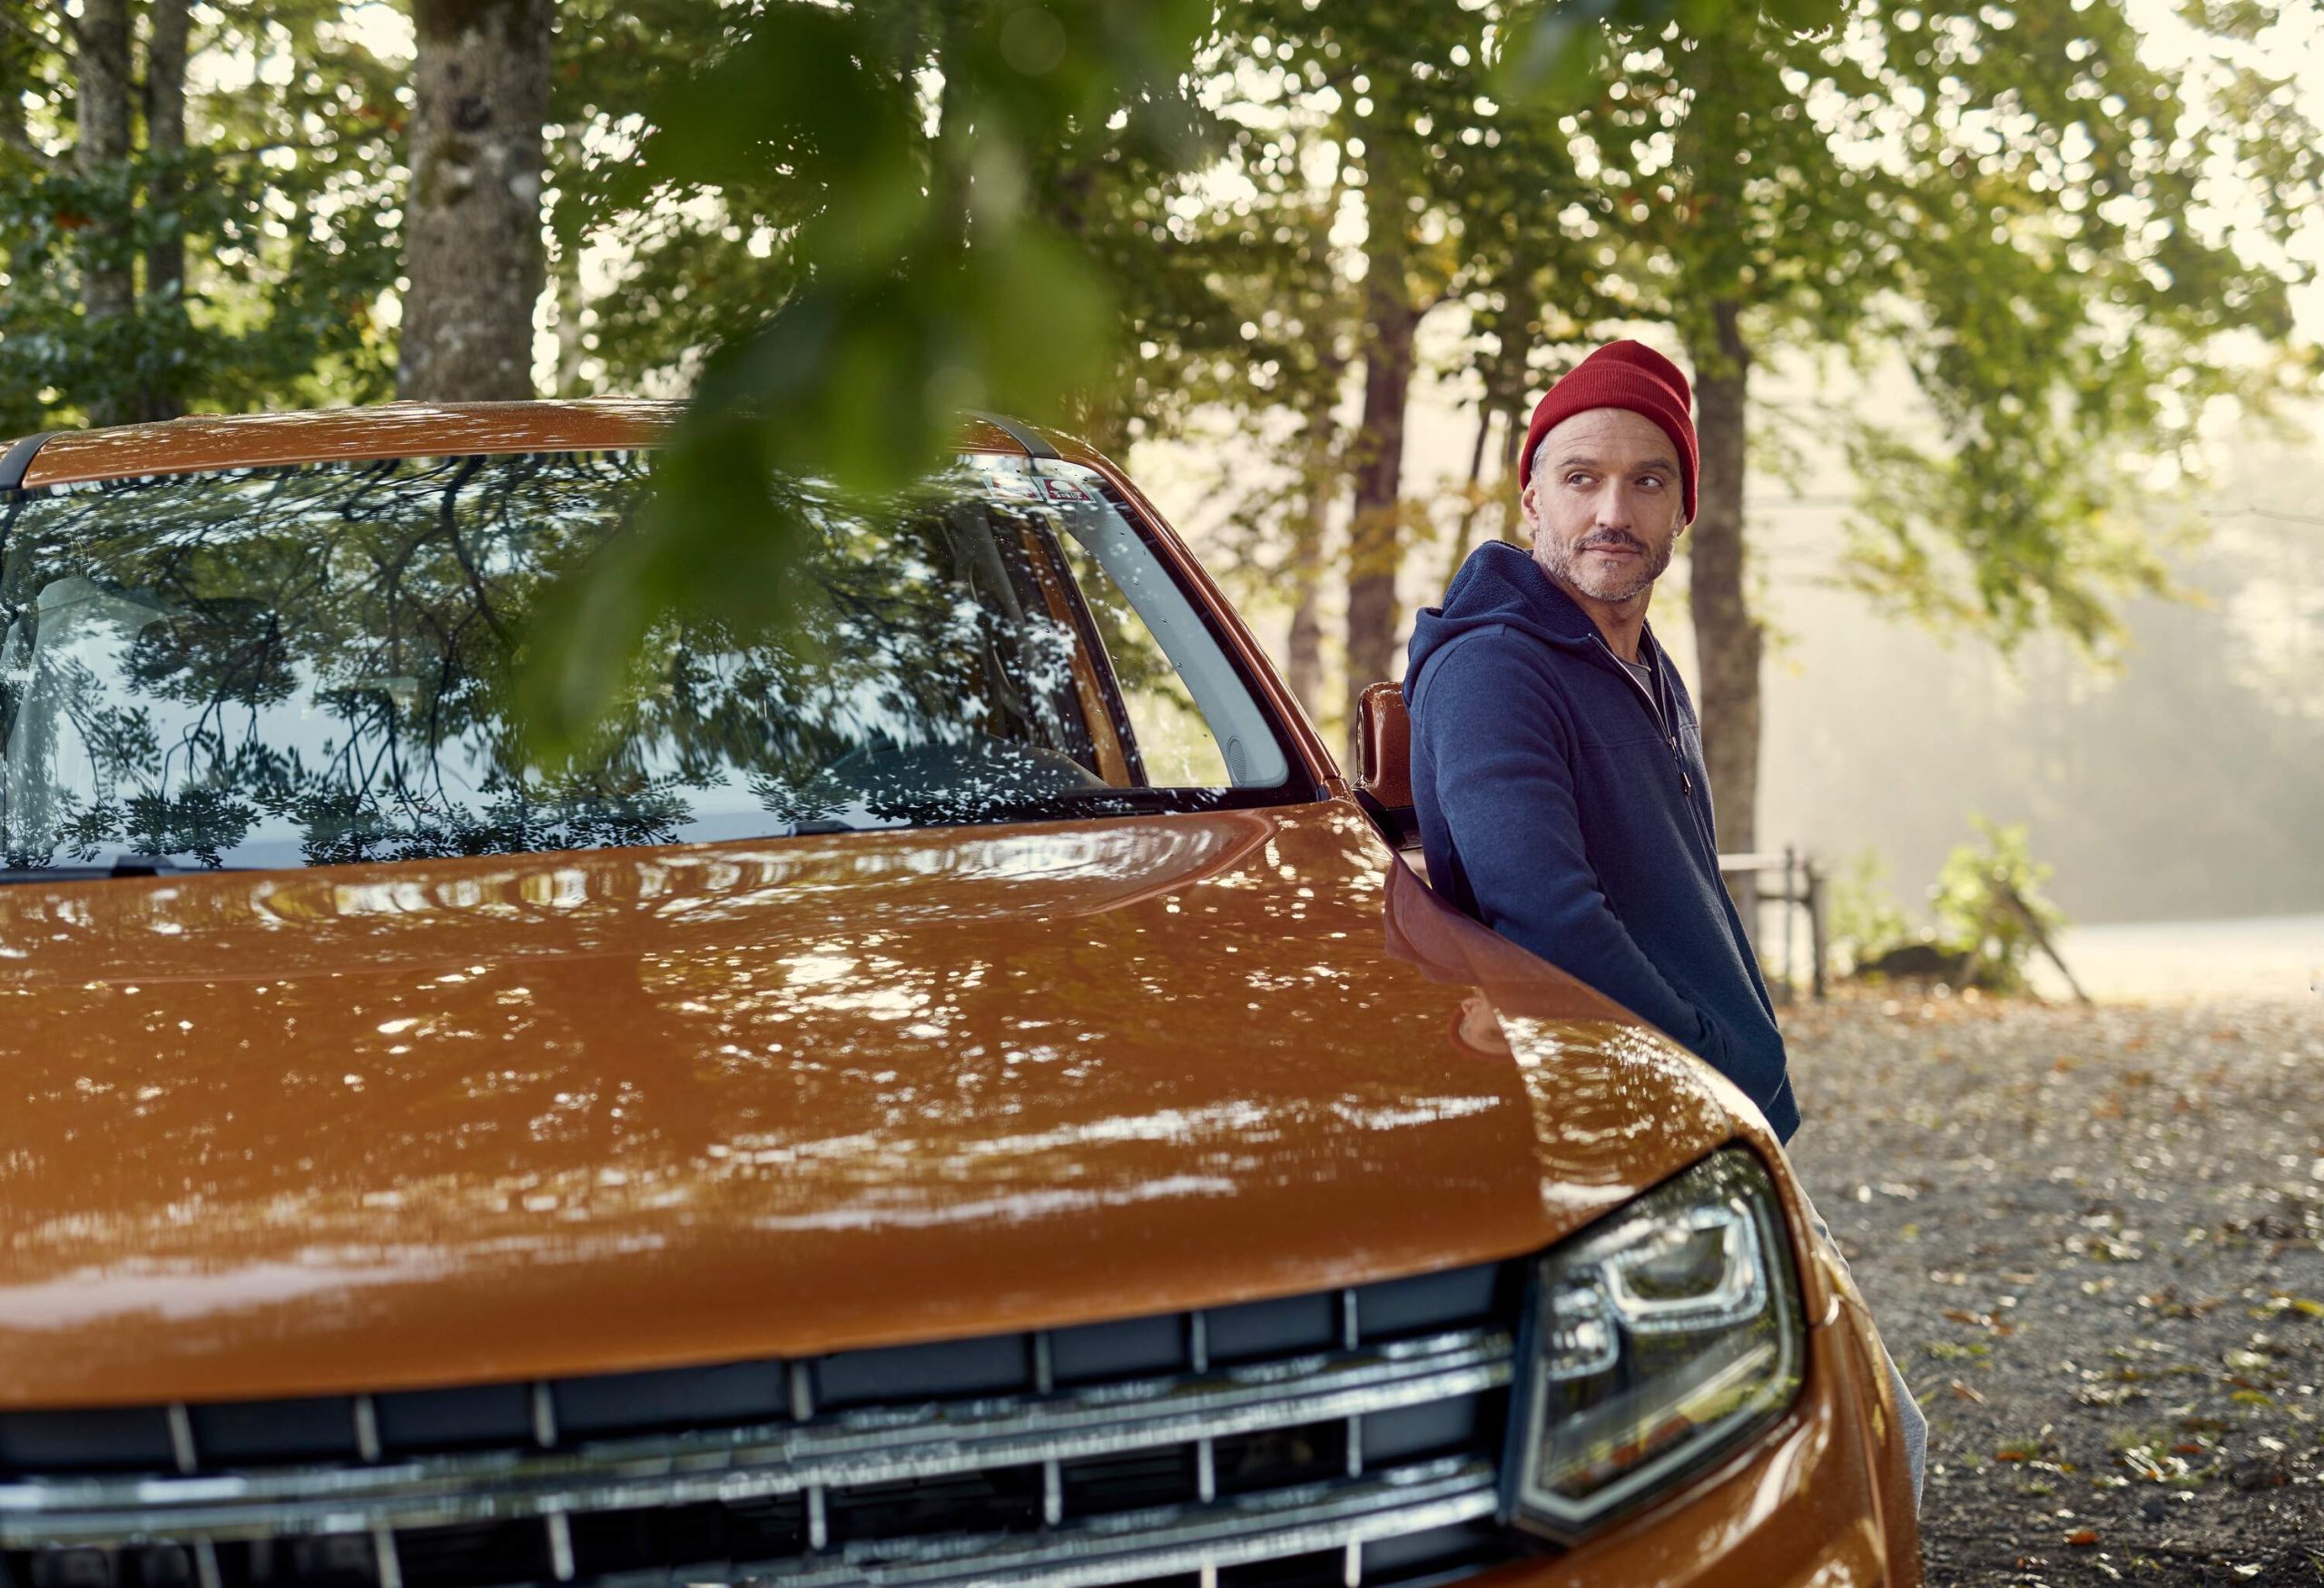 Man glances back while leaning on a brown pickup truck wearing a maroon bonnet and a navy hoodie.